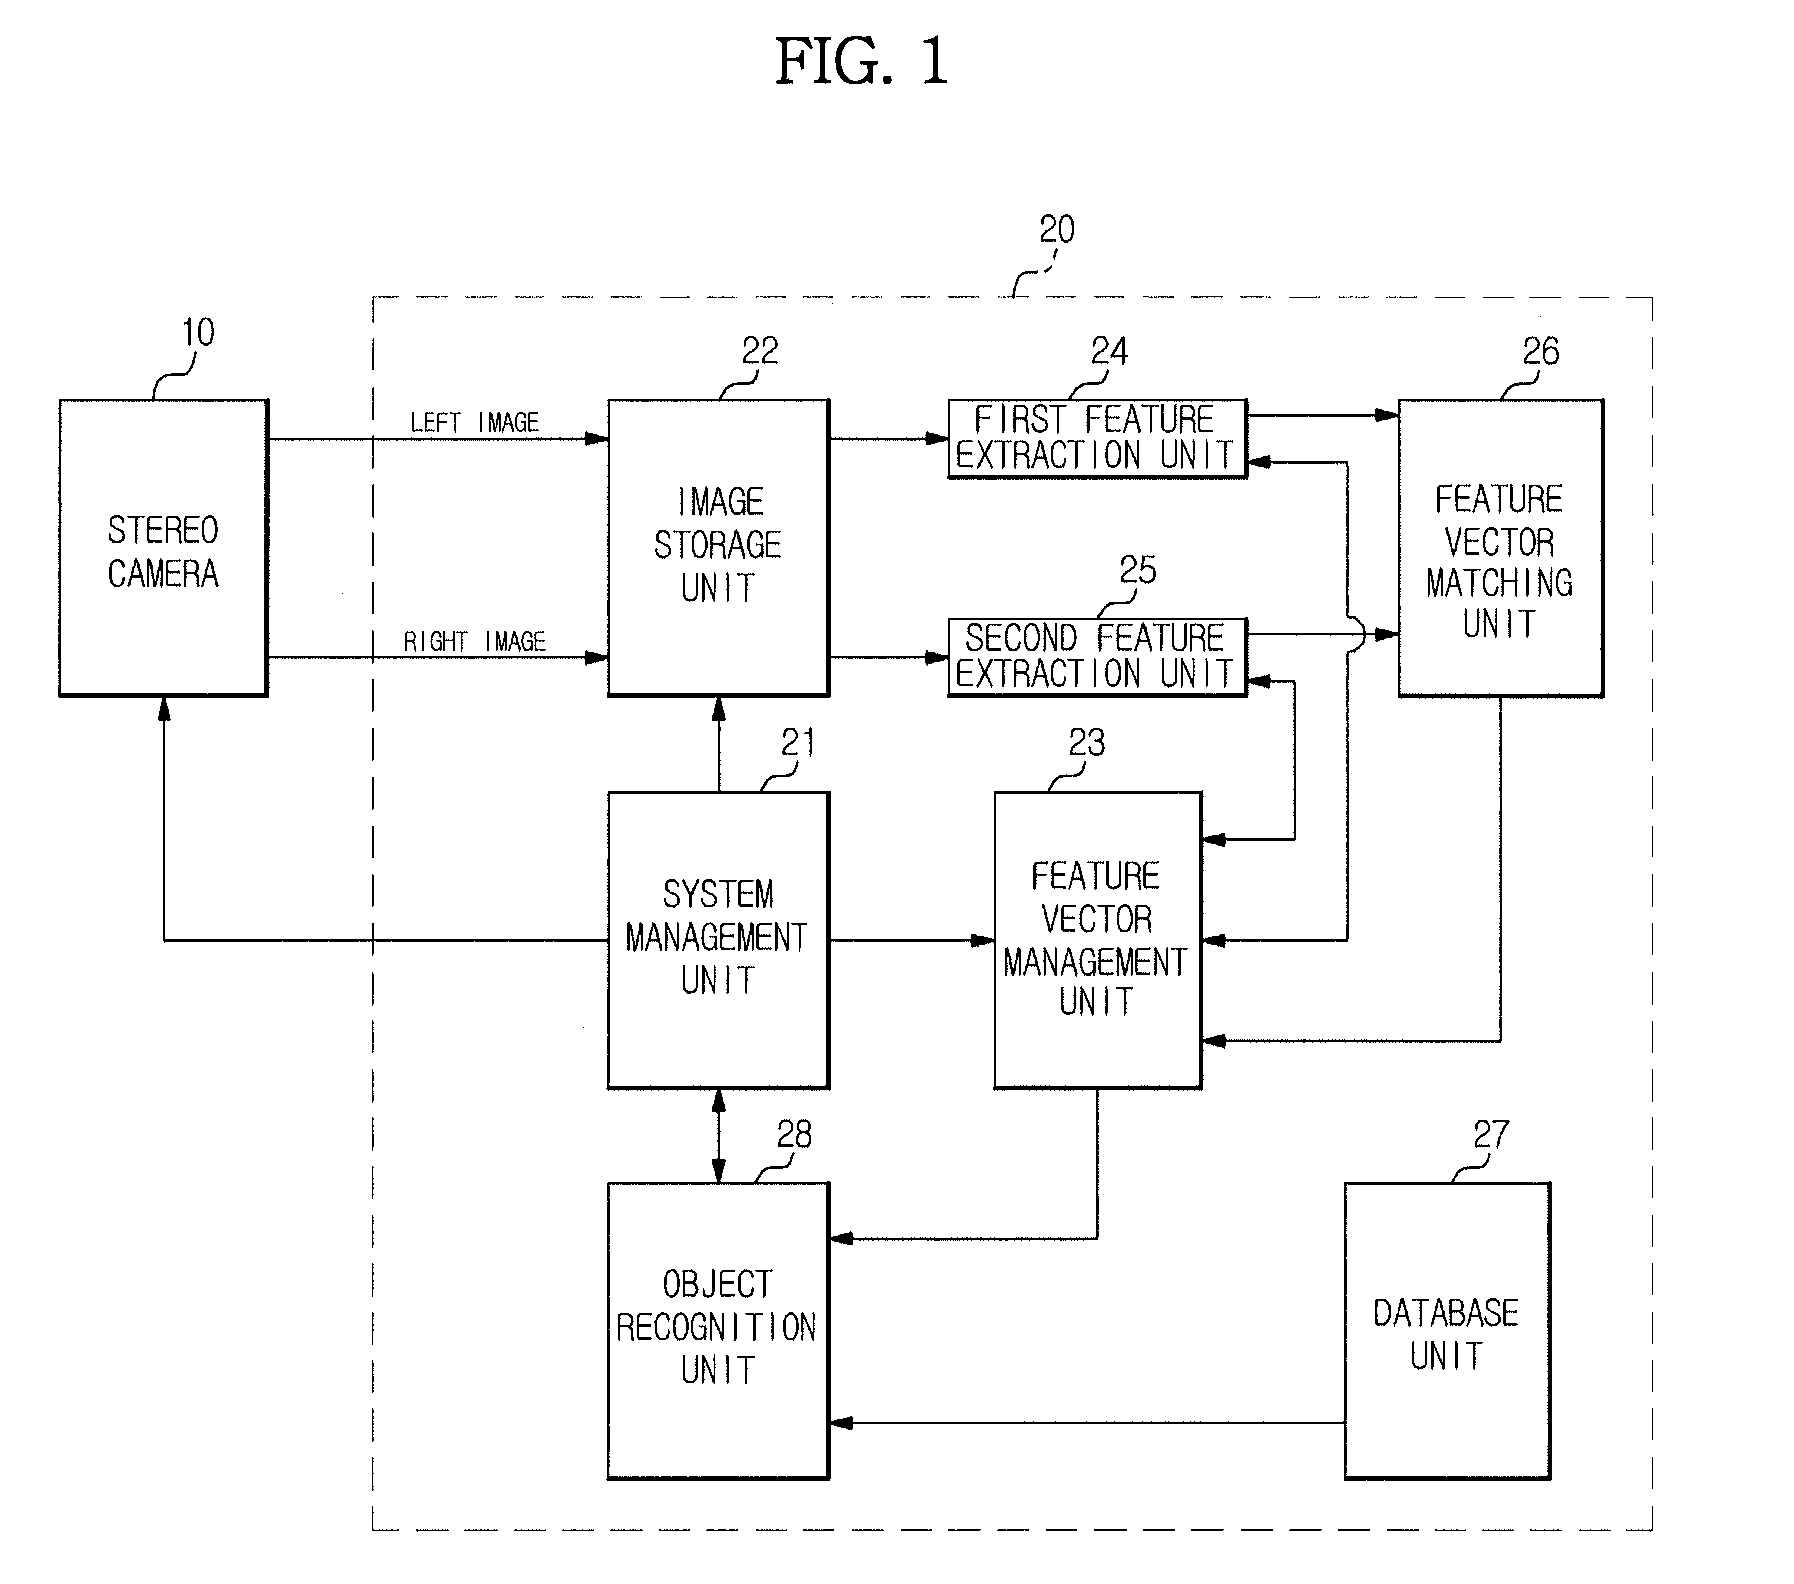 Object recognition system using left and right images and method